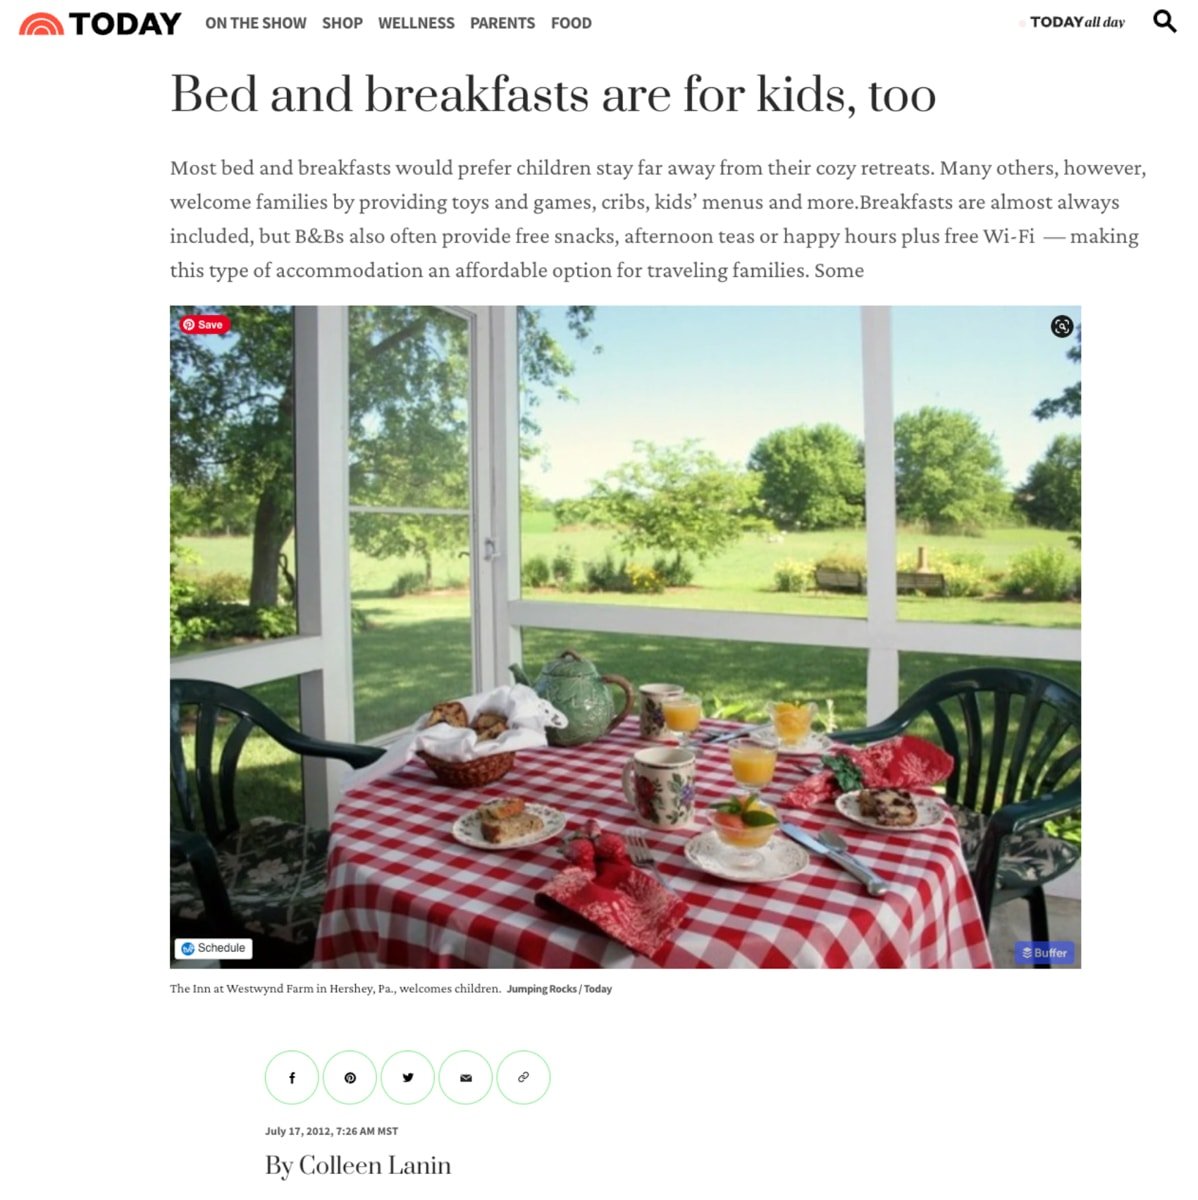 One of The Travel Mama Colleen Lanin's articles for The TODAY Show online